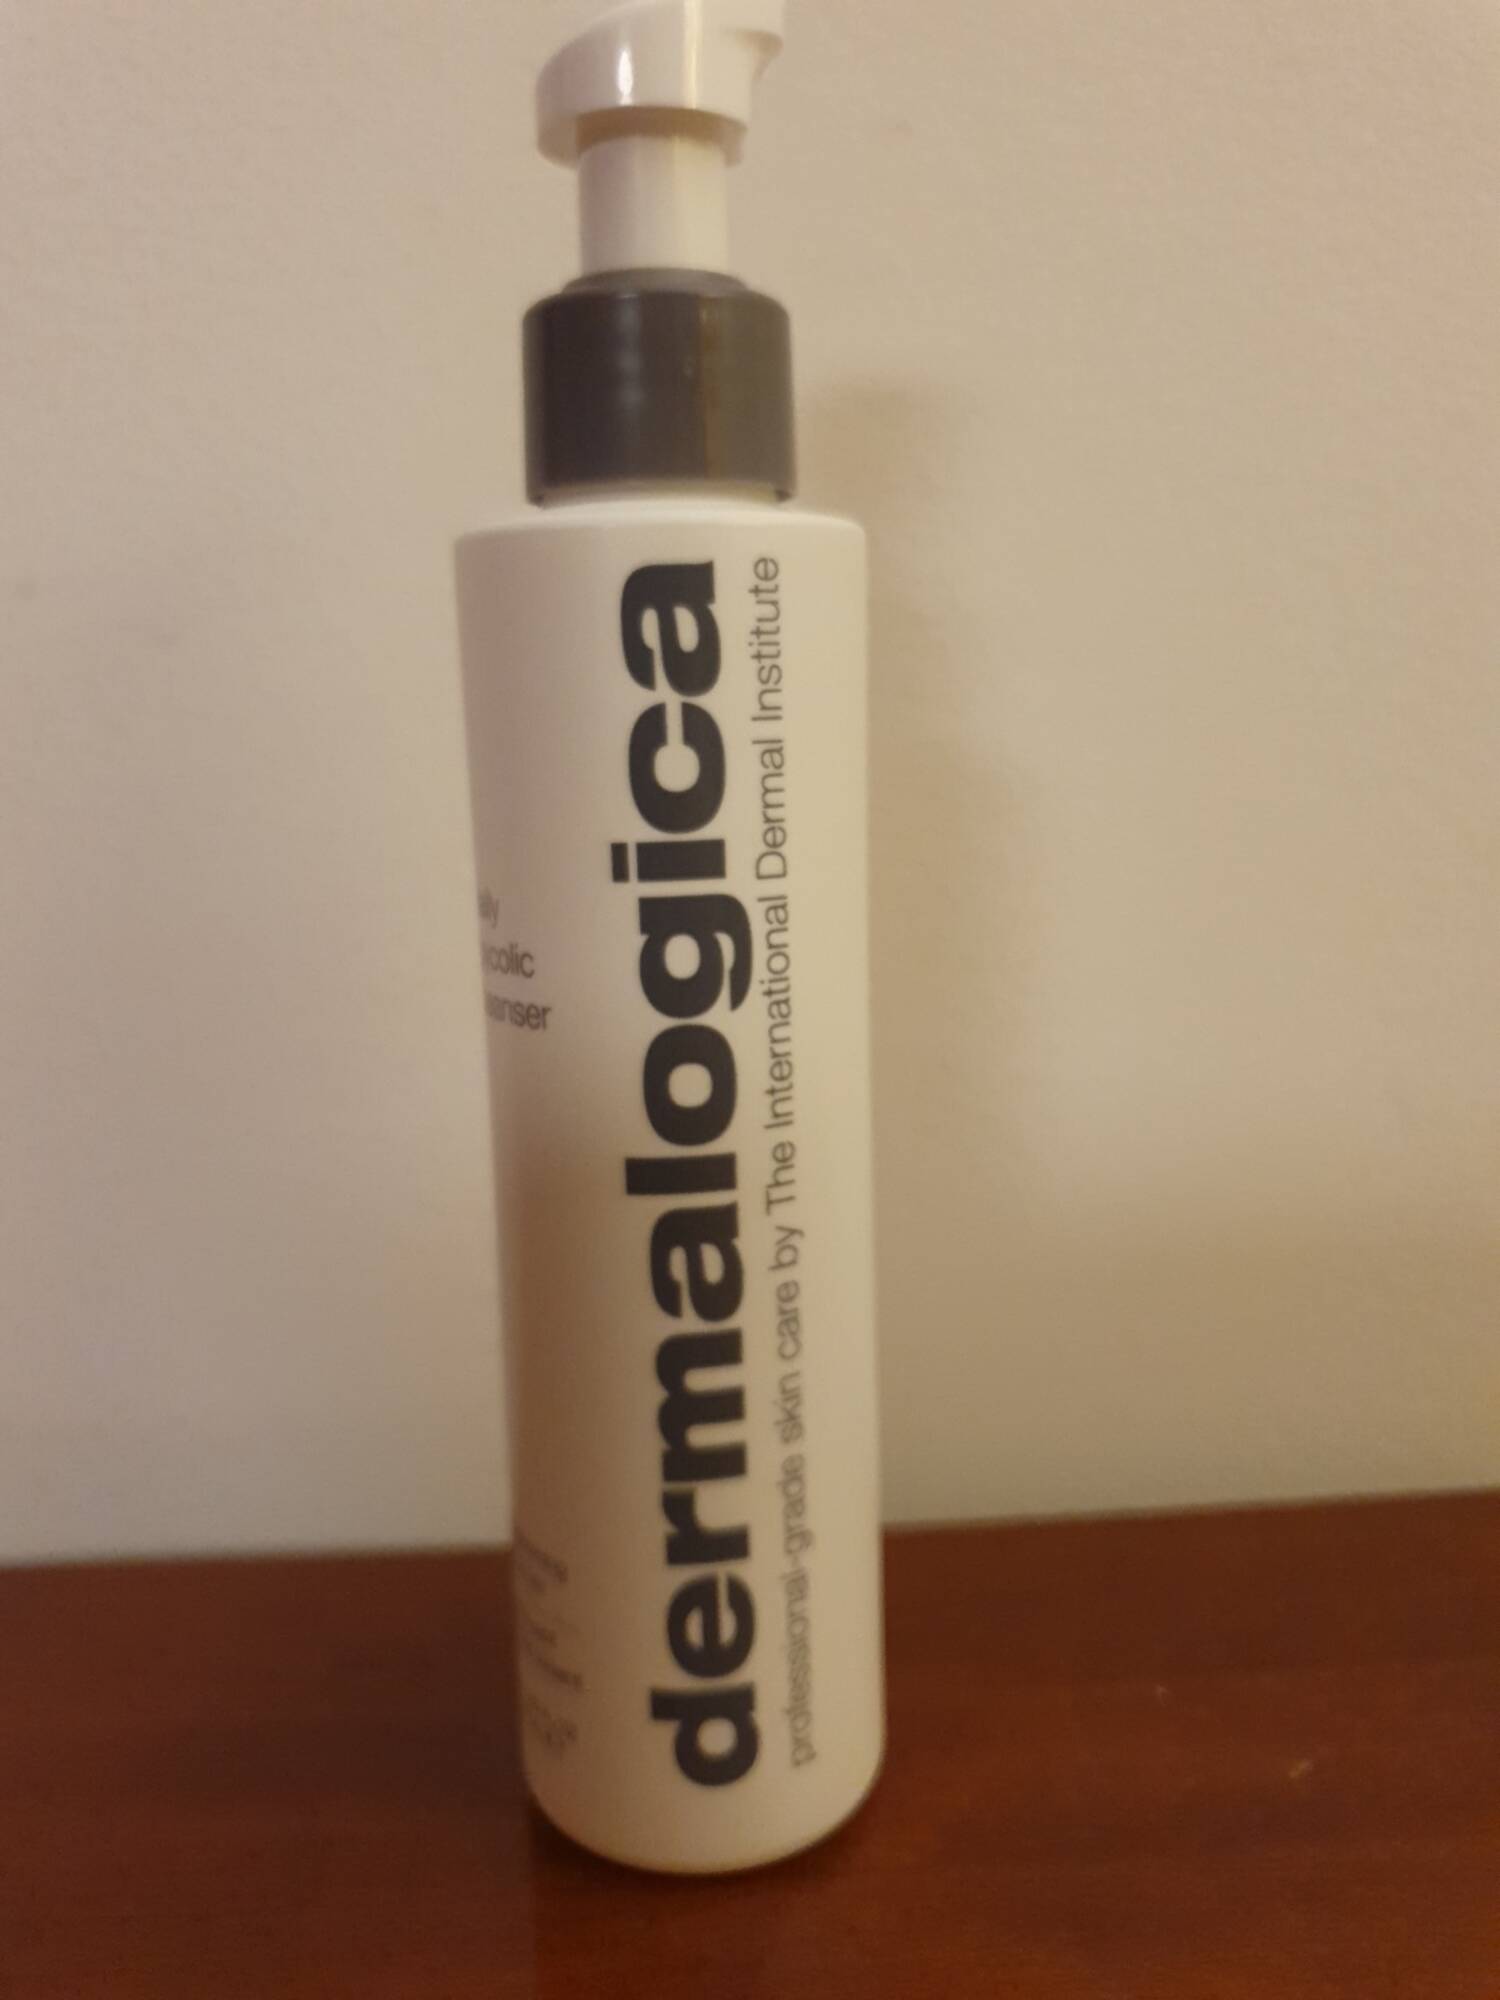 DERMALOGICA - Dailly glycolic cleanser